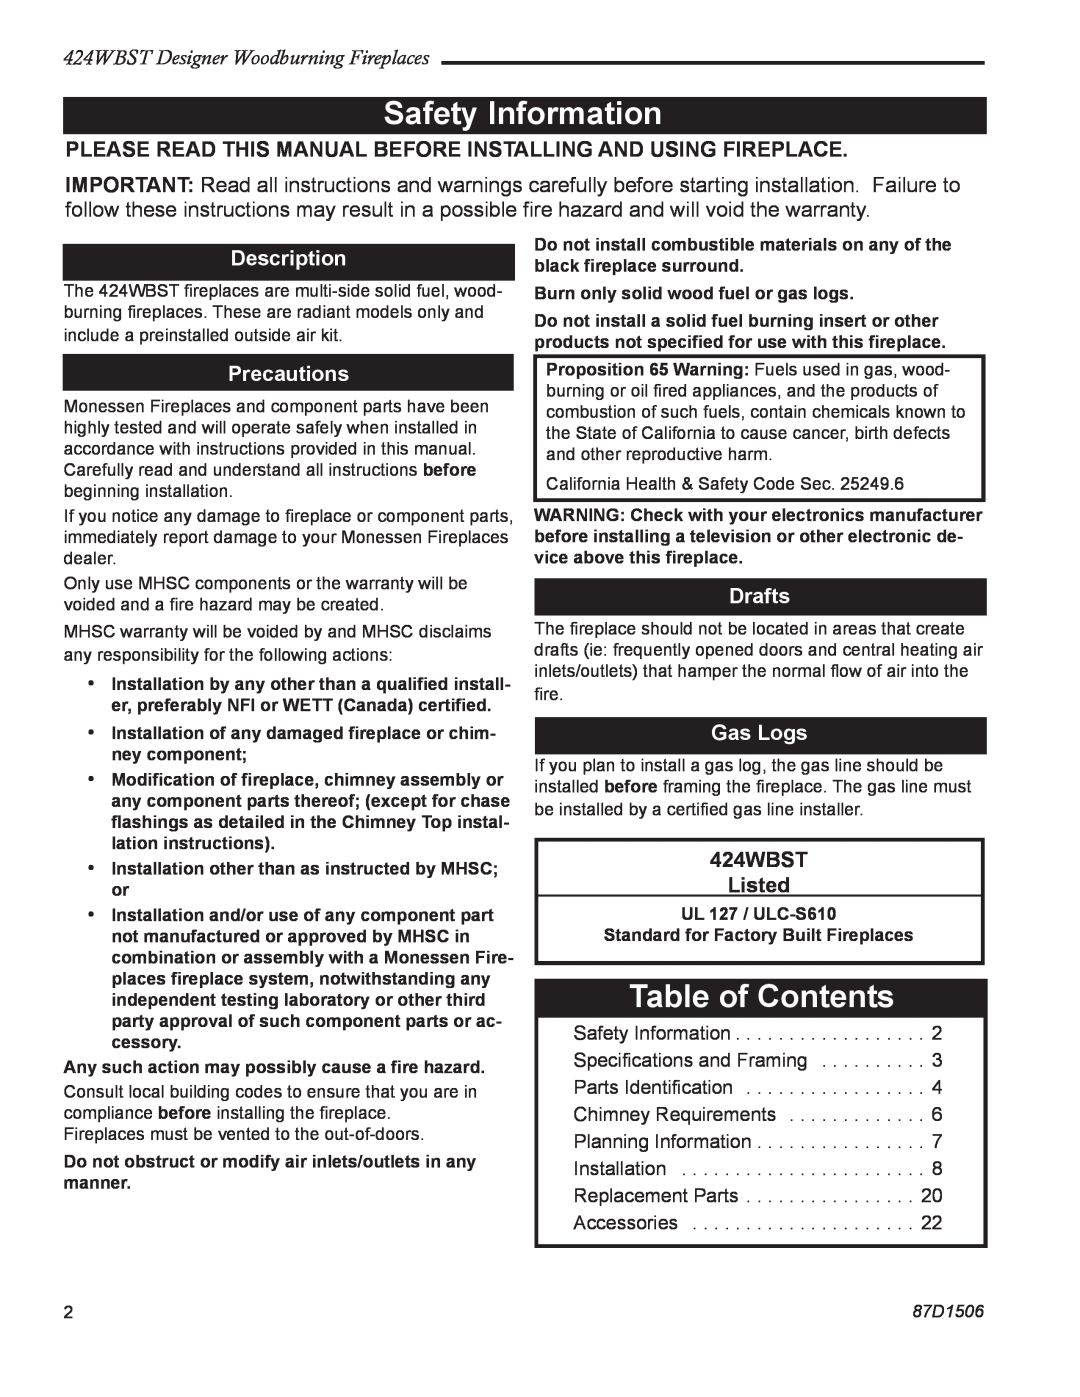 Monessen Hearth Safety Information, Table of Contents, 424WBST Designer Woodburning Fireplaces, Description, Drafts 